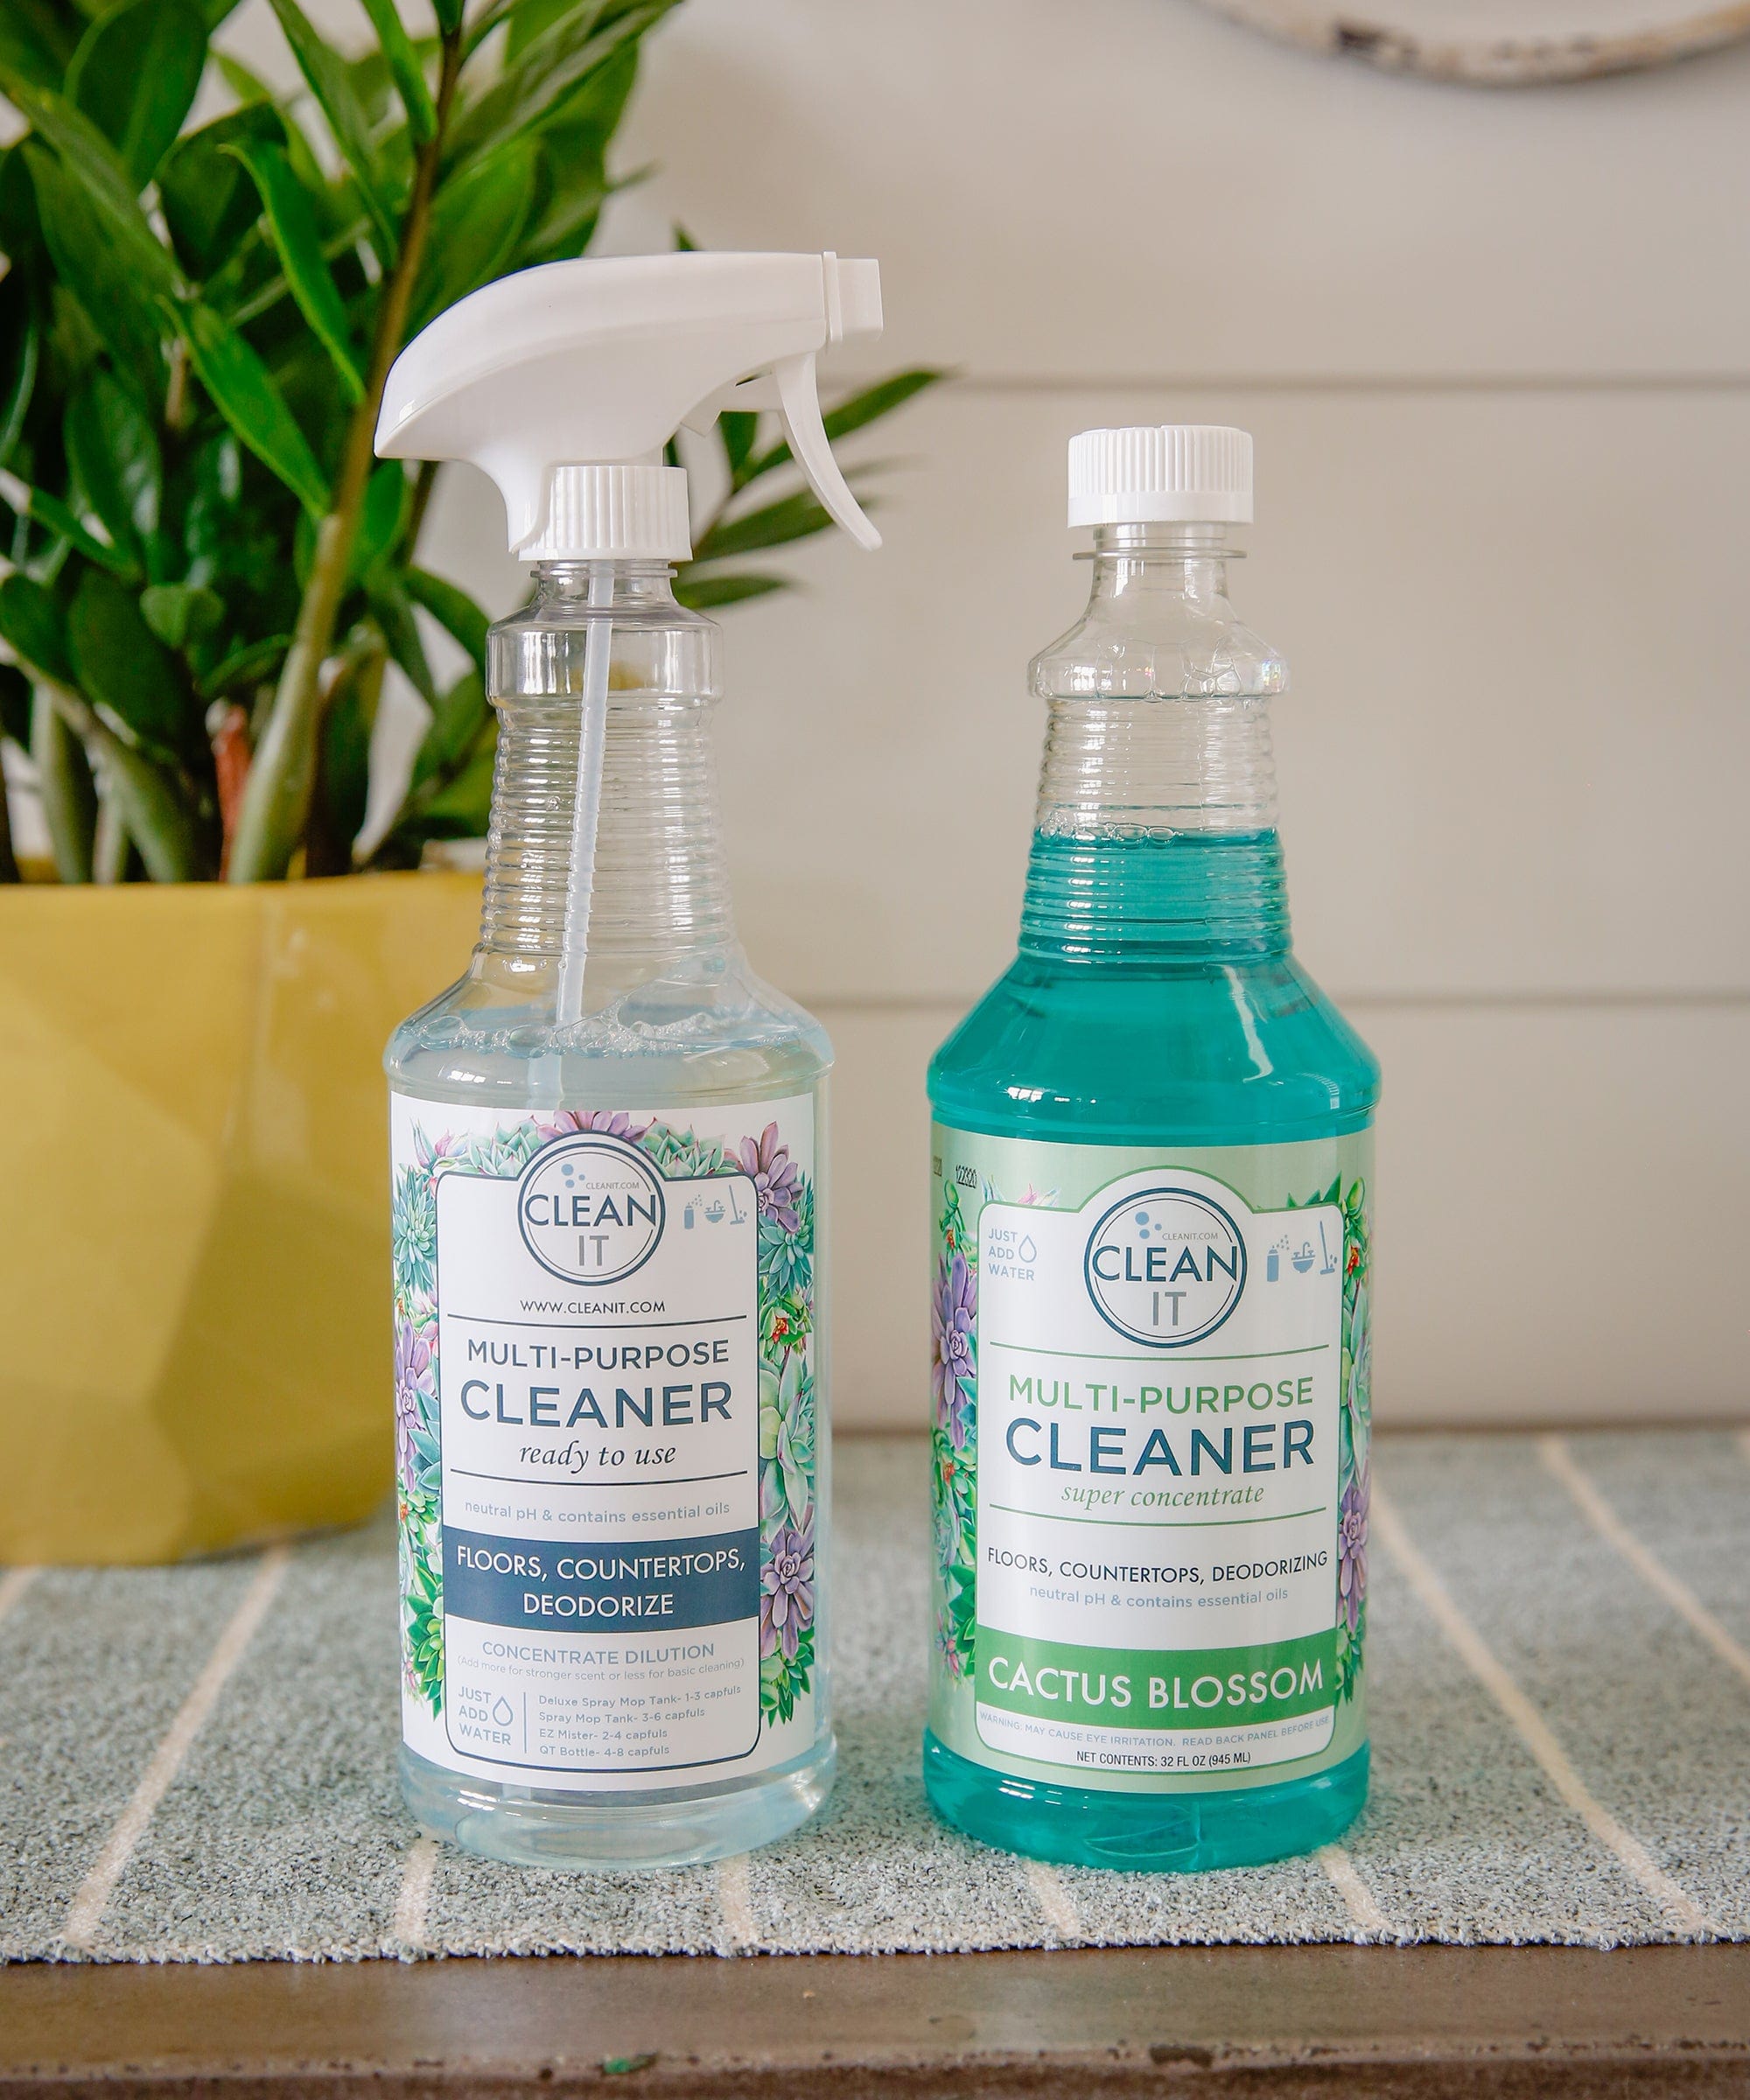 Clean It Multi-Purpose Cleaner Super Concentrate – Don Aslett